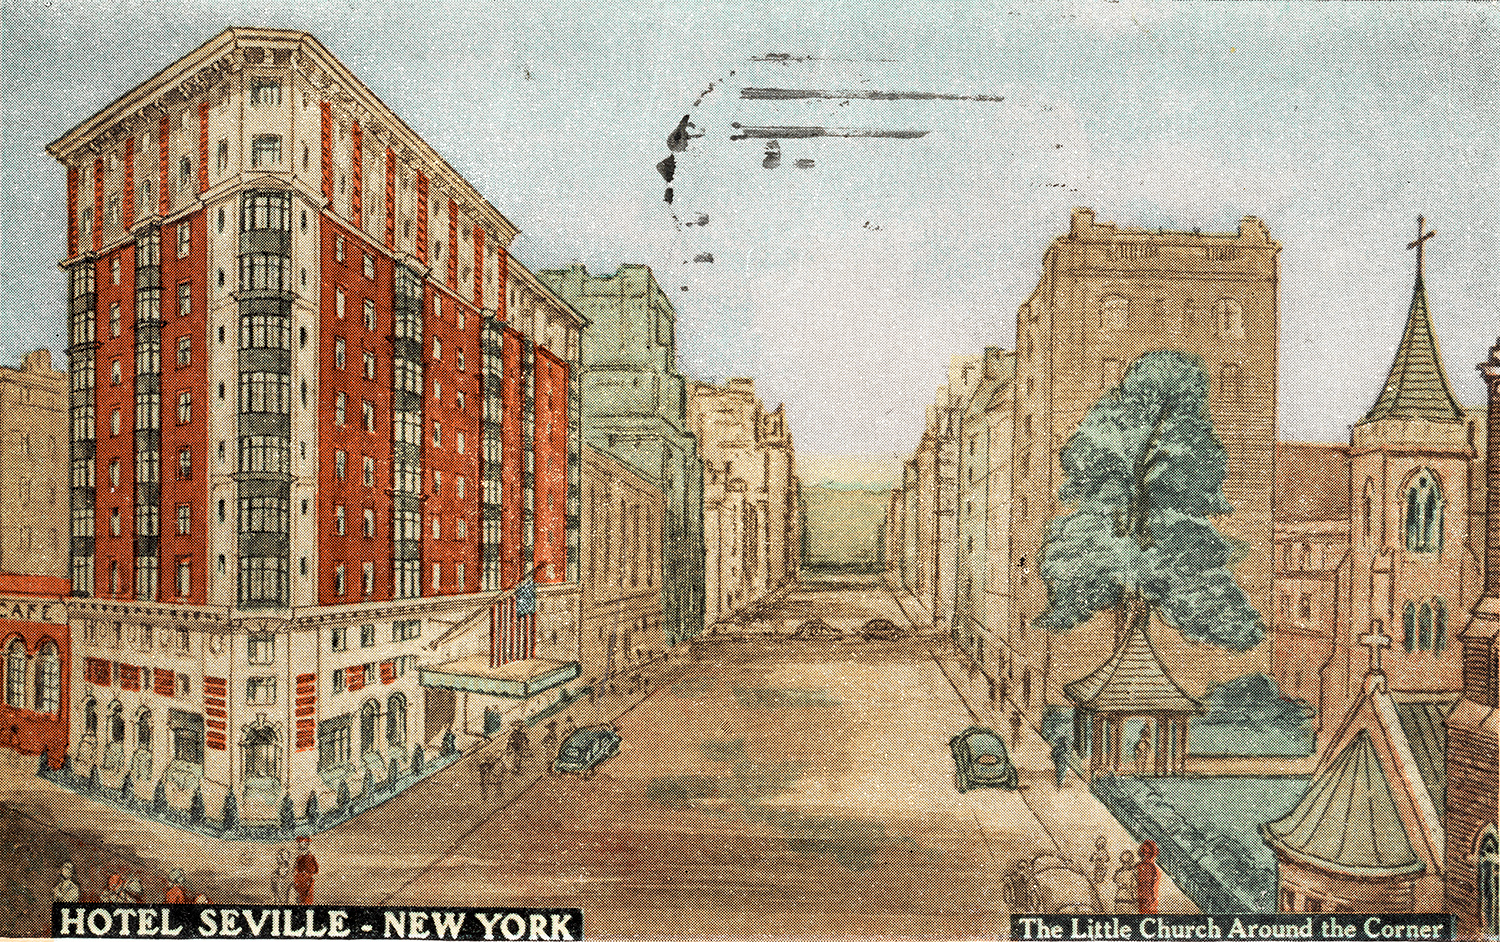 Colorized illustration of a several-stories tall brick hotel on the corner of a street in New York City